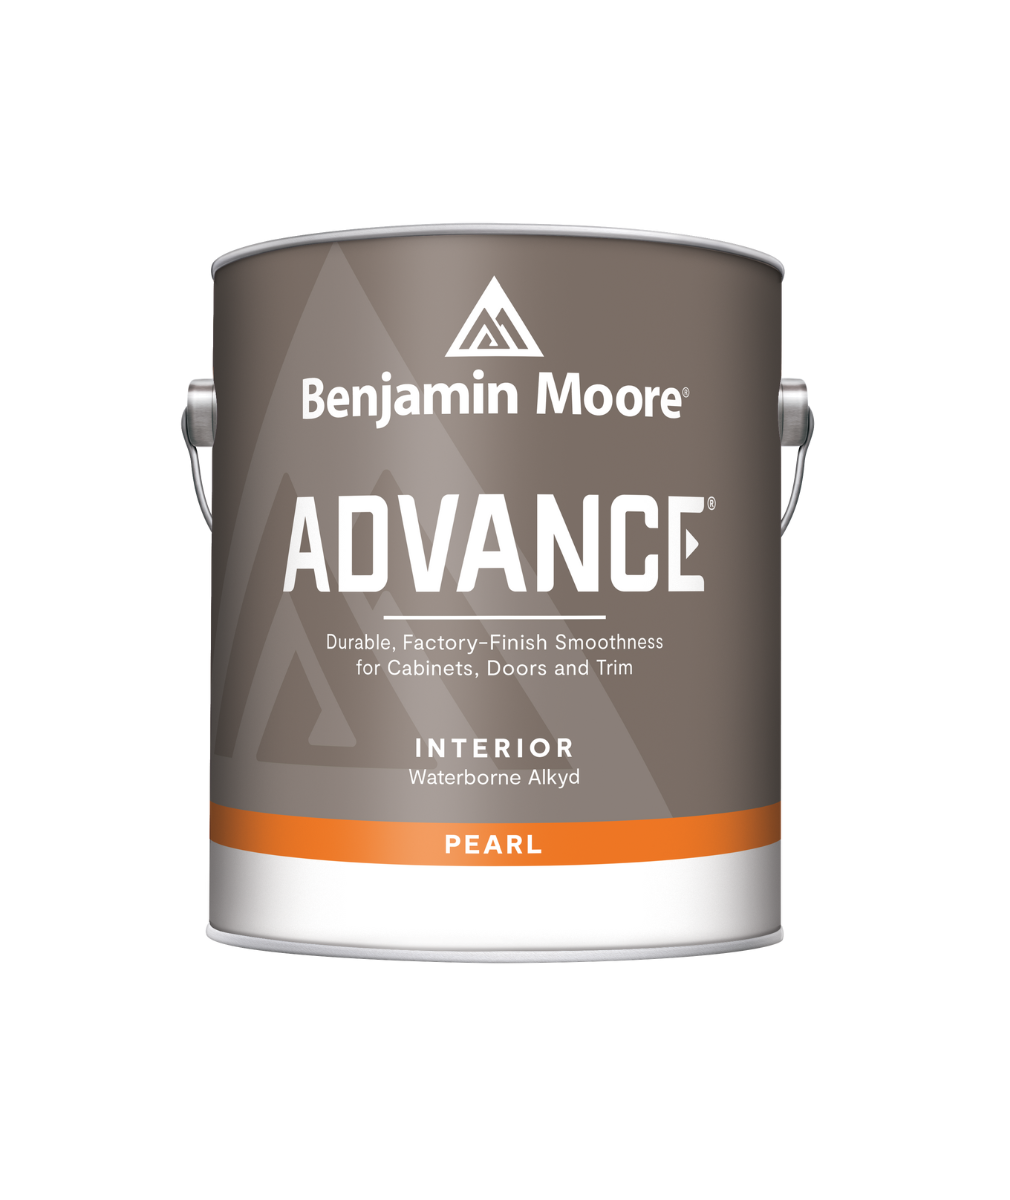 Benjamin Moore ADVANCE® Waterborne Interior Alkyd Paint in a Pearl finish at Southwestern Paint Houston, TX.